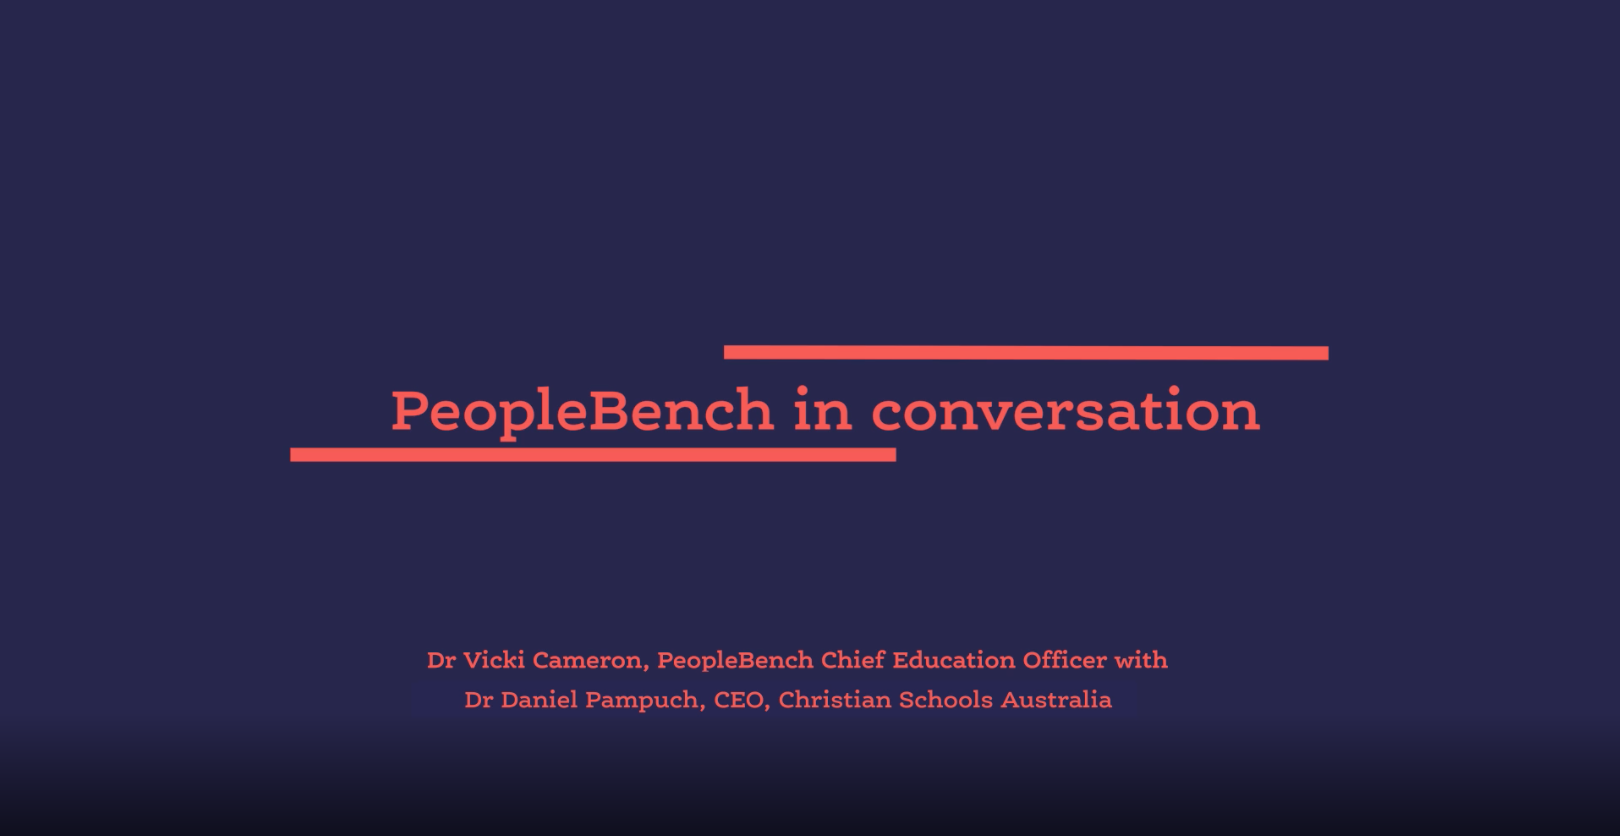 Image is plain blue background with words "PeopleBench in Conversation" in pink.